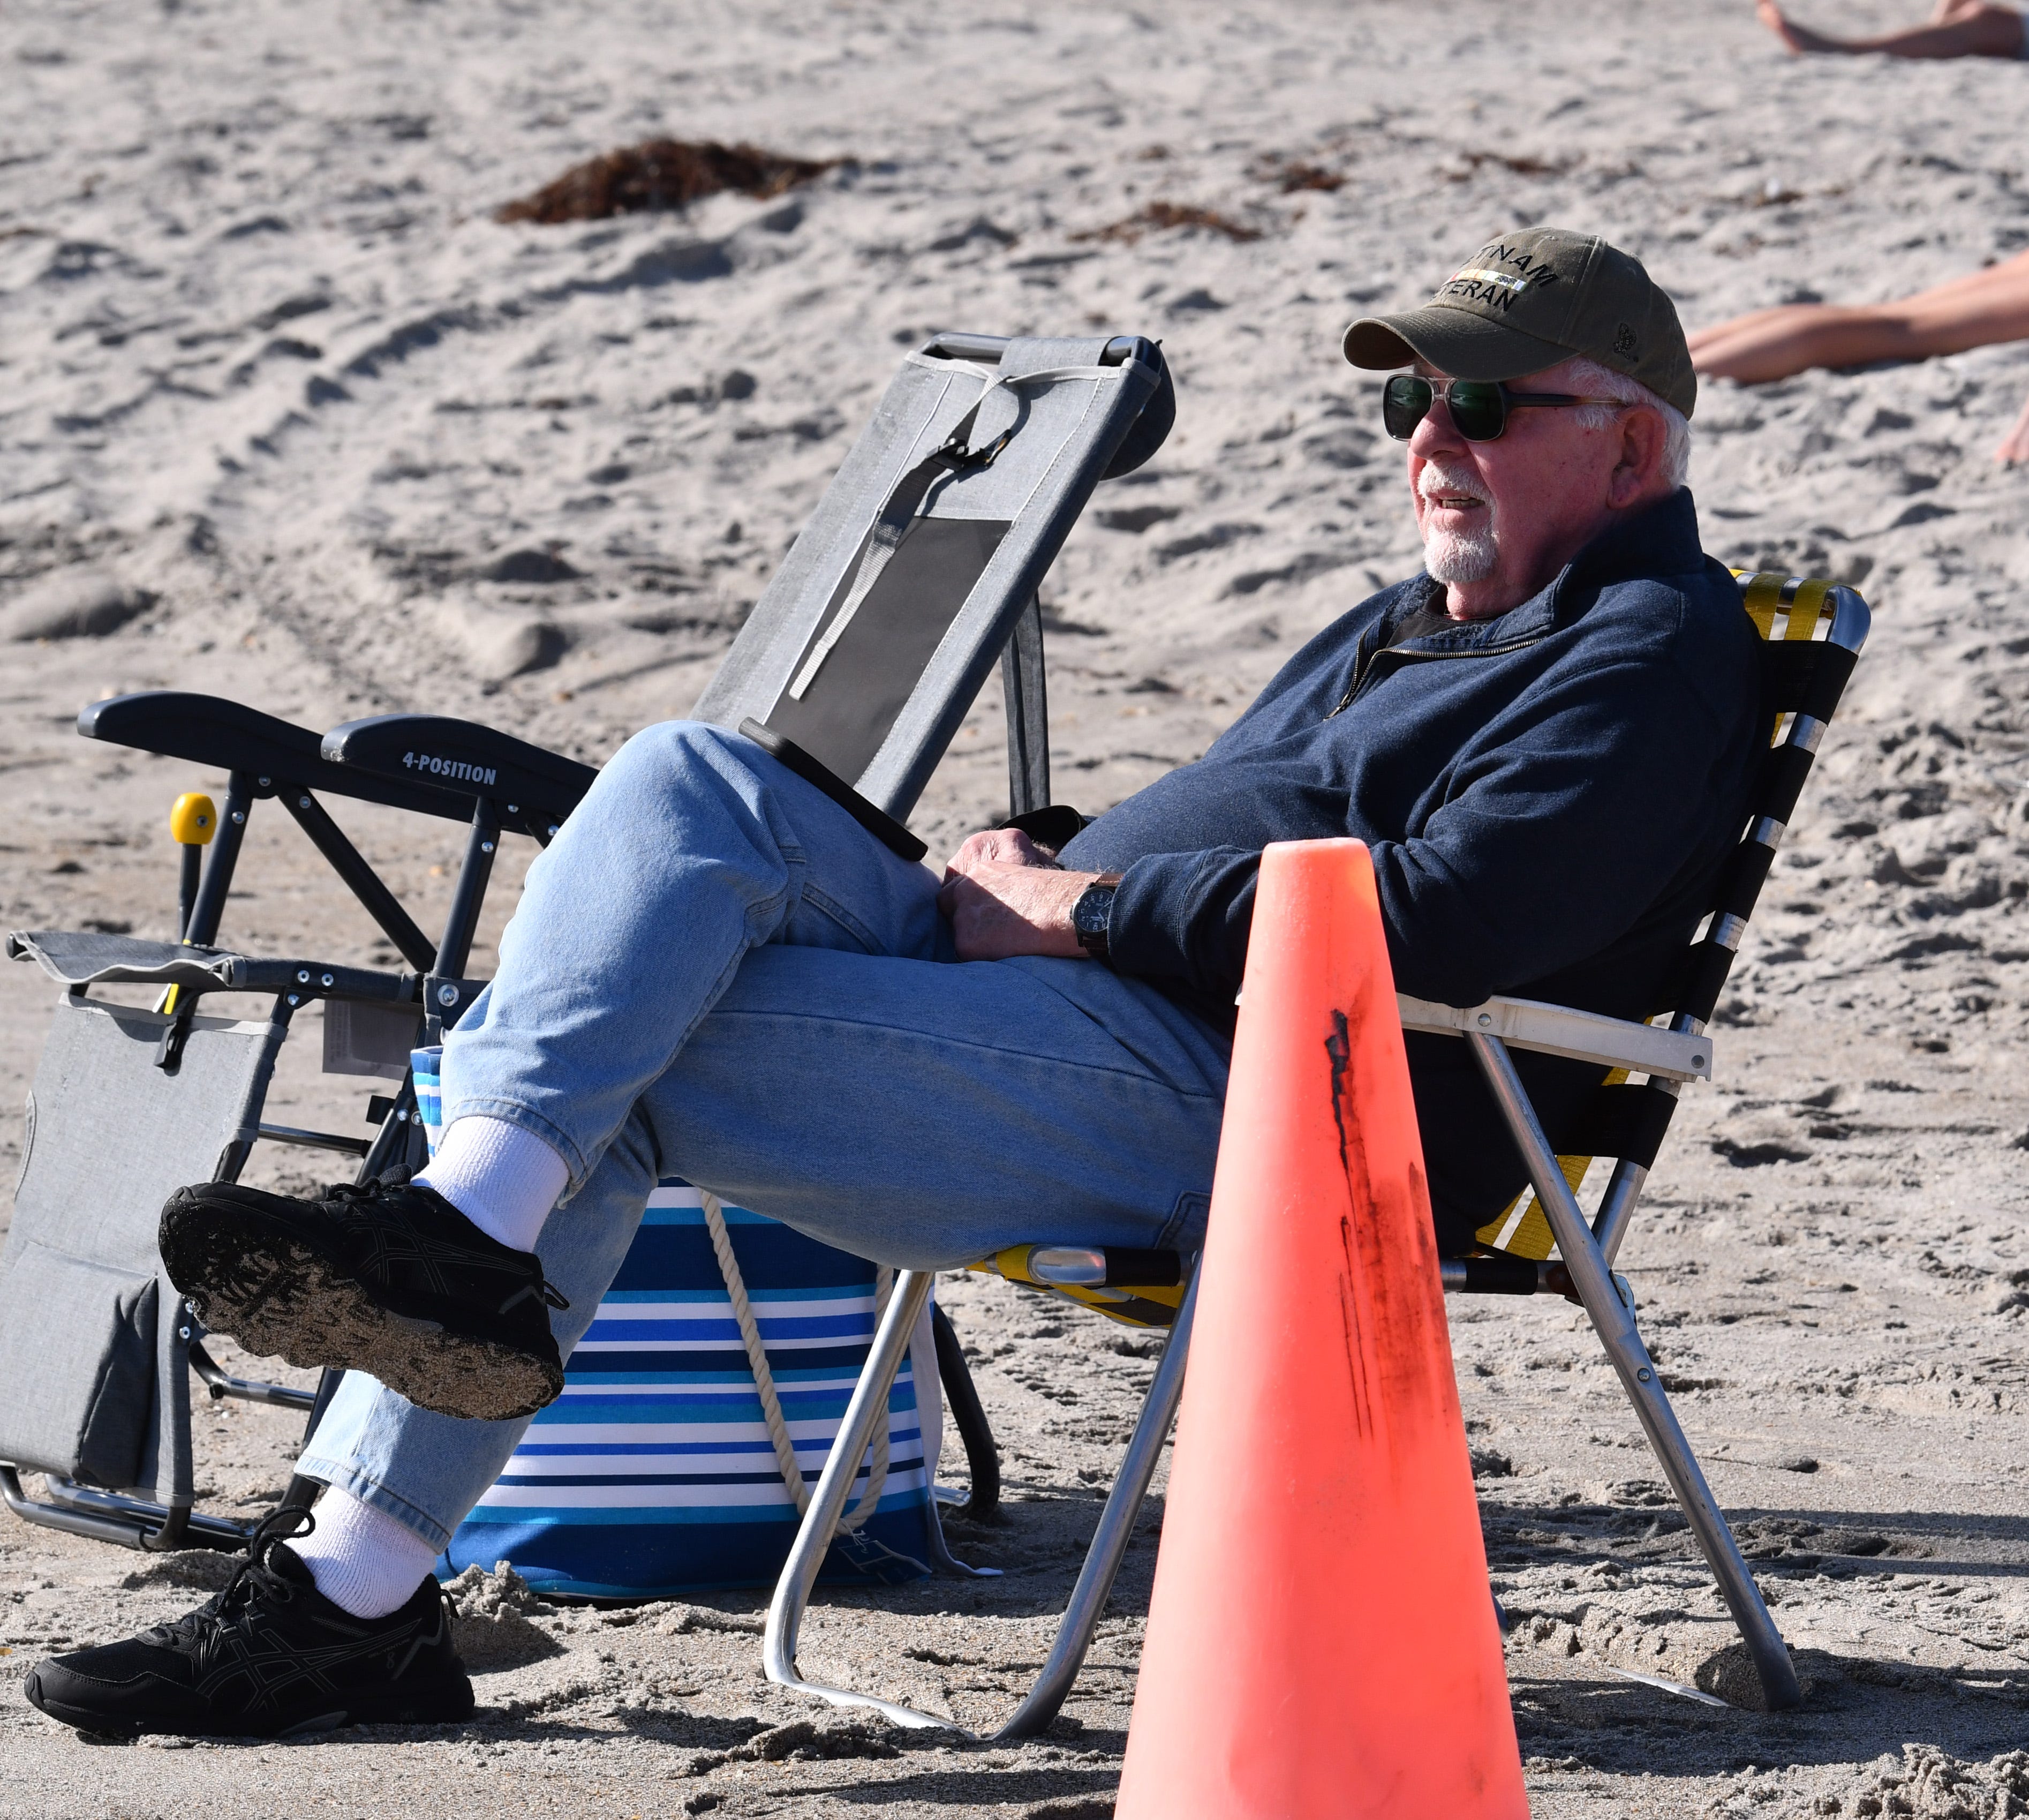 Dave Opperman and his wife are from Iowa. Dave was sitting near the lifeguard stand at the Westgate Cocoa Beach Pier enjoying the weather. While it was a little chilly, he noted it was 20 degrees back in Iowa.